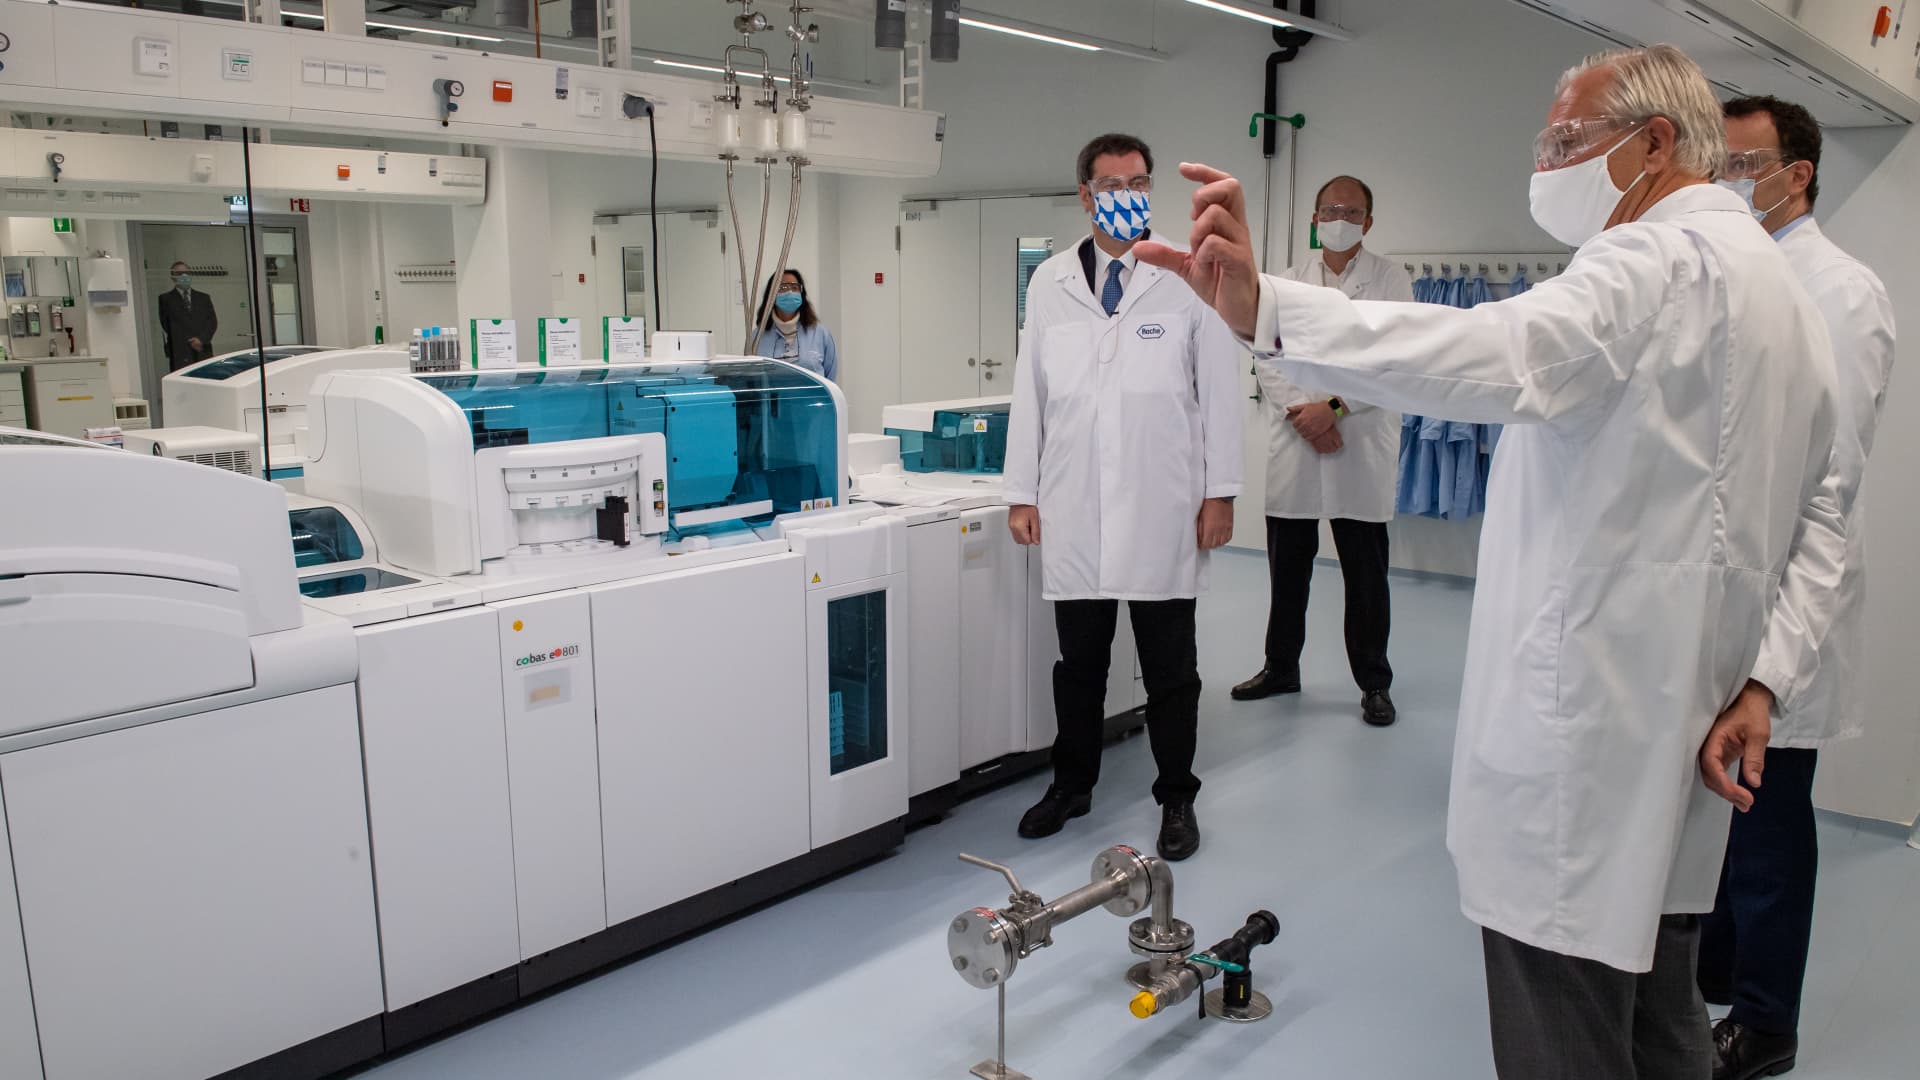 Markus Söder (l-r, CSU), Prime Minister of Bavaria, Joachim Eberle, Head of Research Diagnostic Roche, Christoph Franz, Chairman of the Board of Directors of Roche, and Jens Spahn (CDU), German Federal Minister of Health, visit the Roche development laboratory for the new serological antibody test Elecsys Anti-SARS-CoV-2.